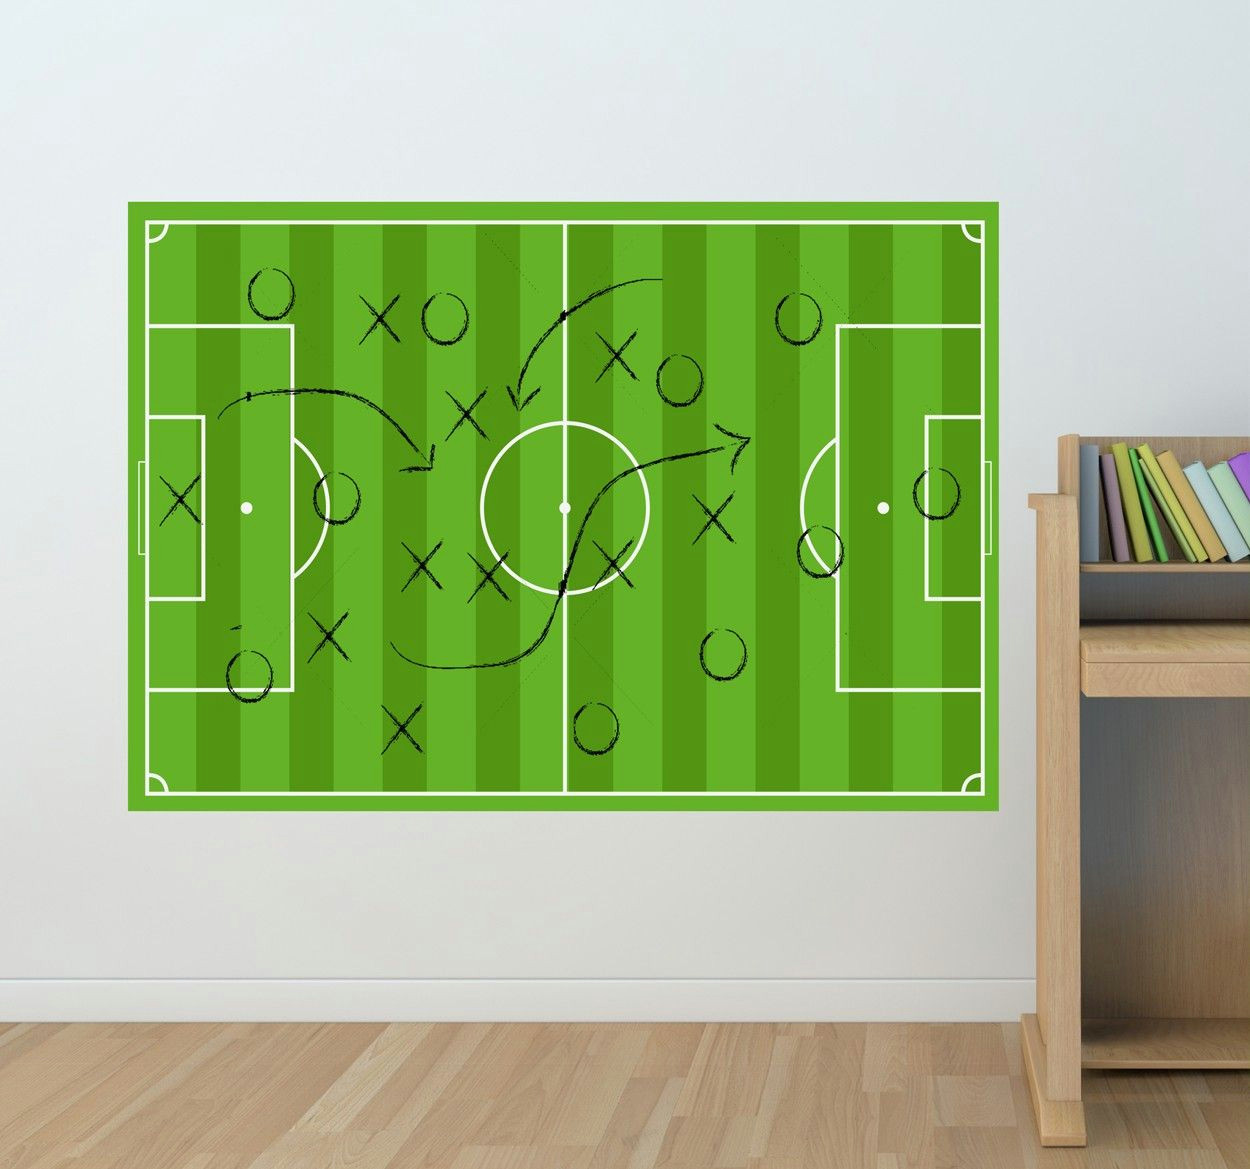 How to Draw A Football Easy Vileda Board Sticker Perfect for All Football Fans or Those